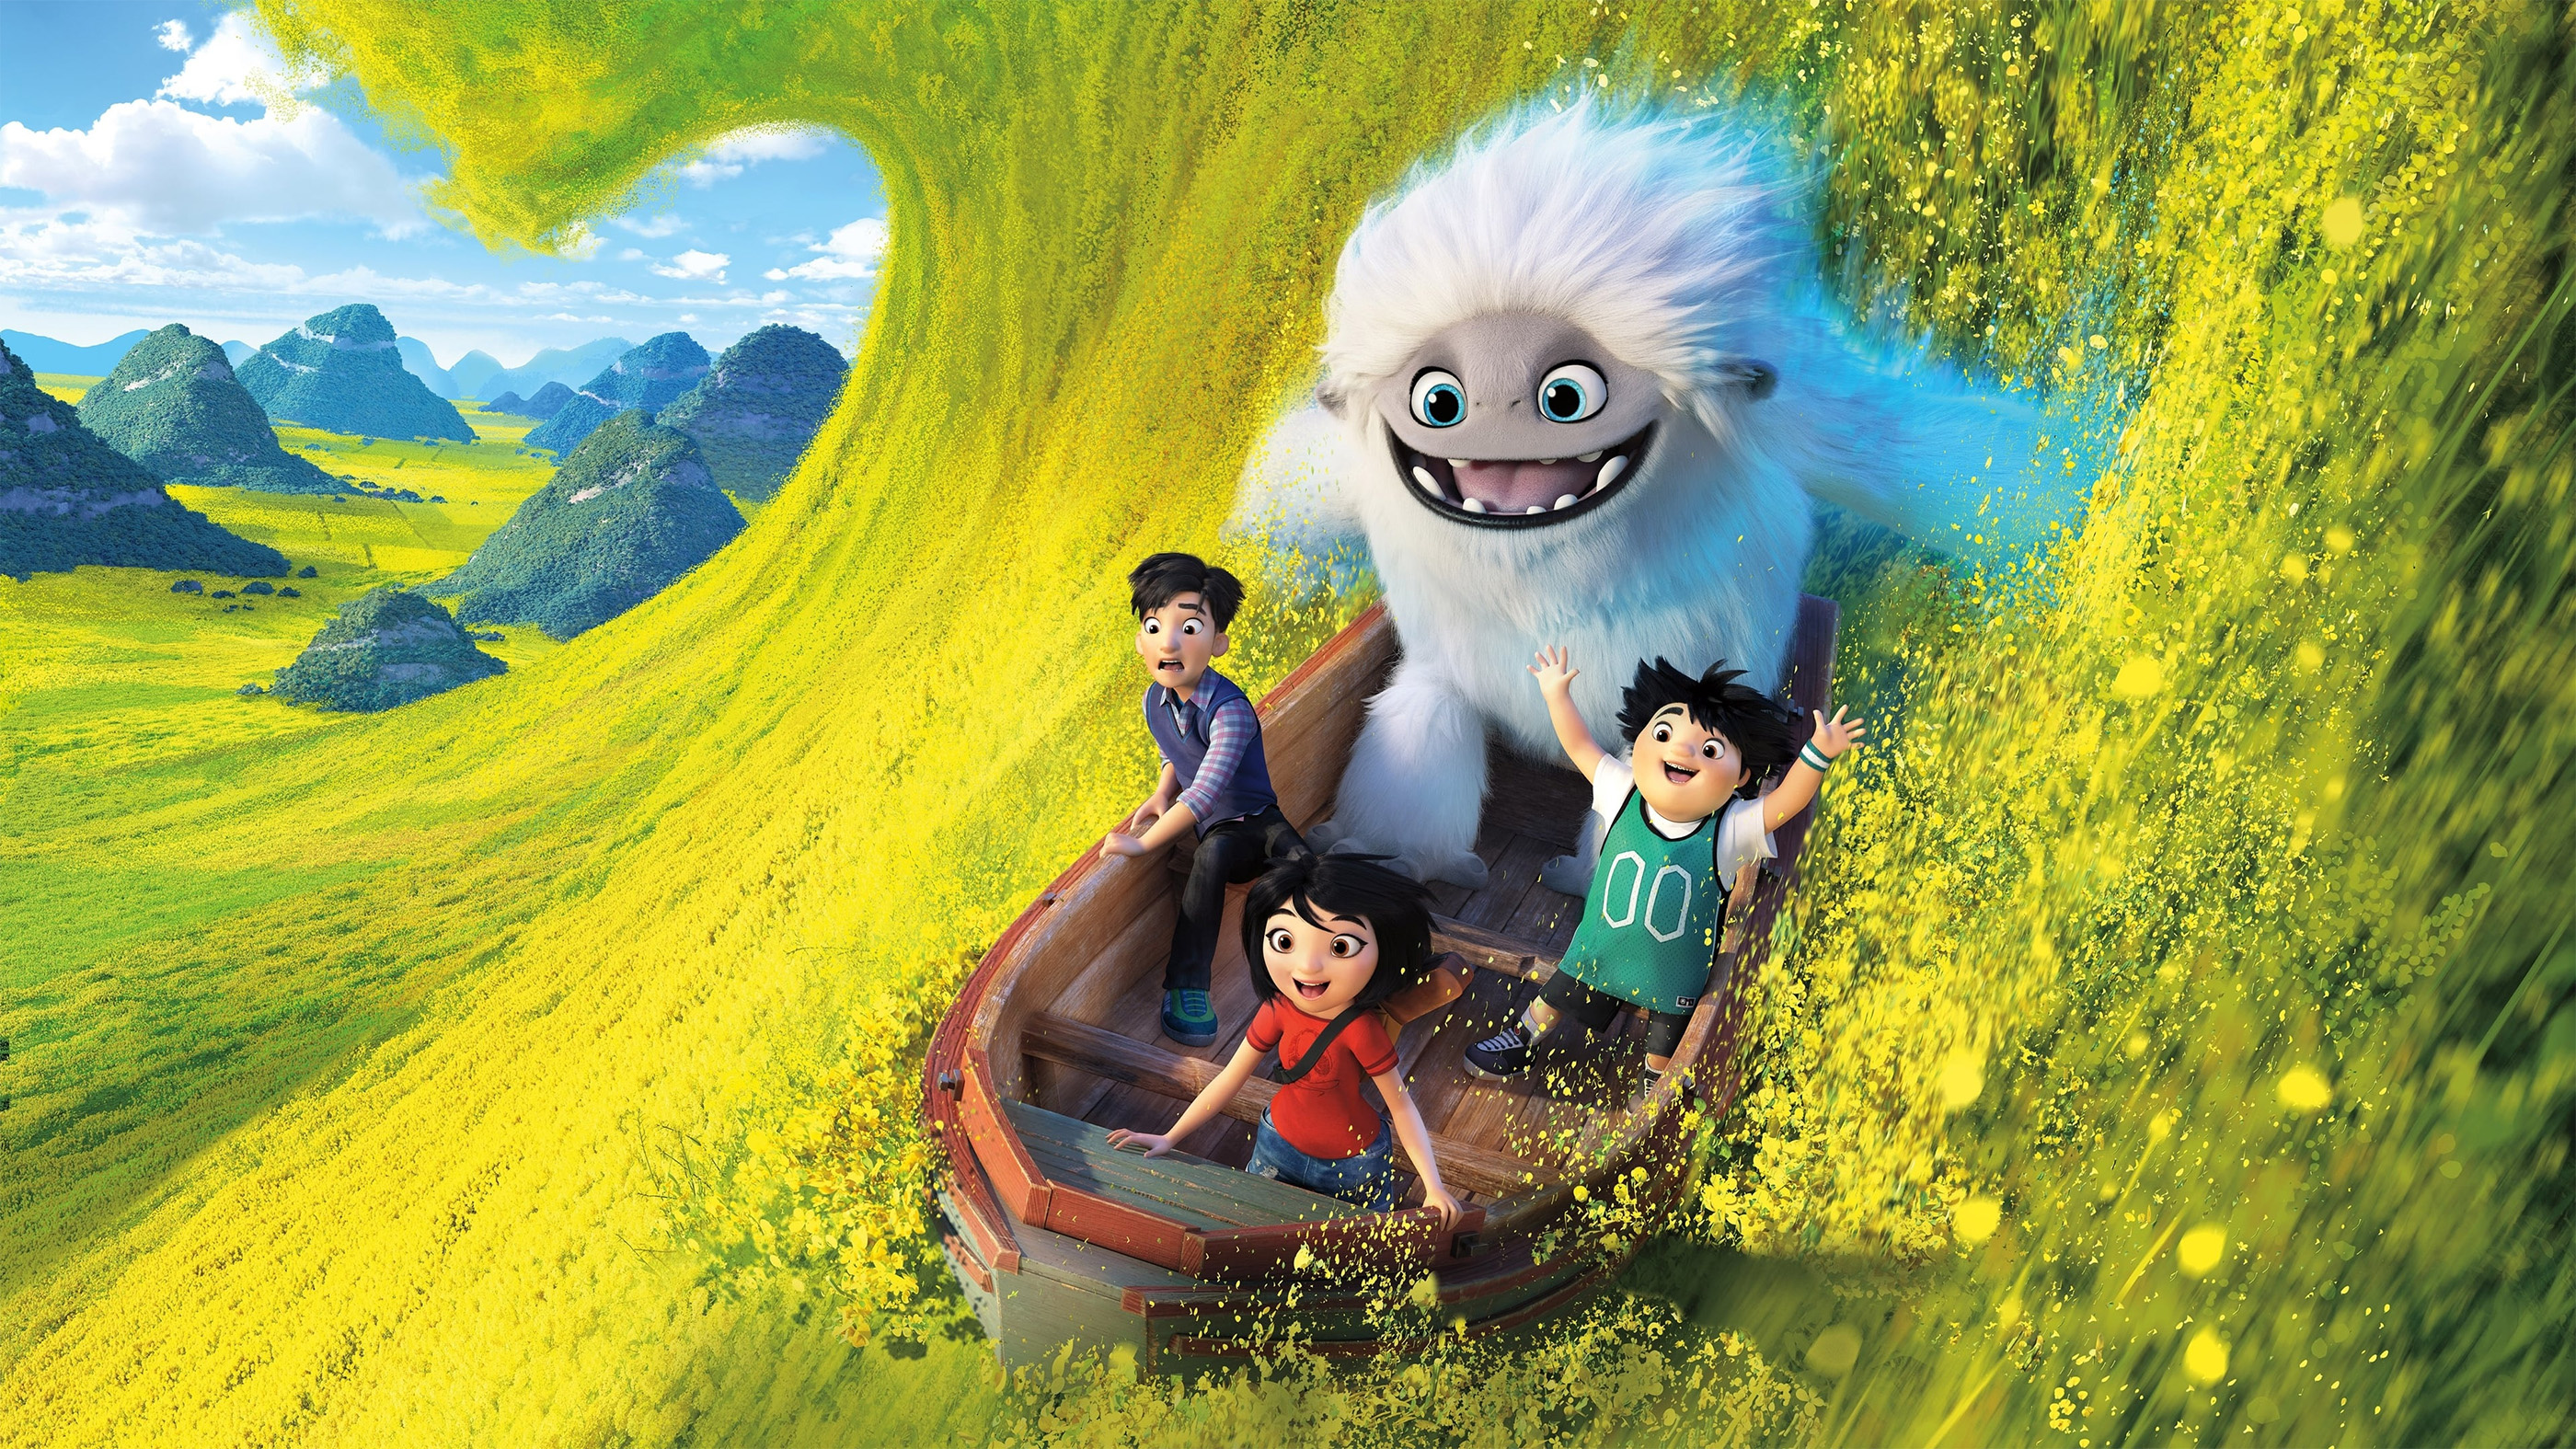 Abominable movie, Microsoft Store, Animation, Charming characters, 2800x1580 HD Desktop